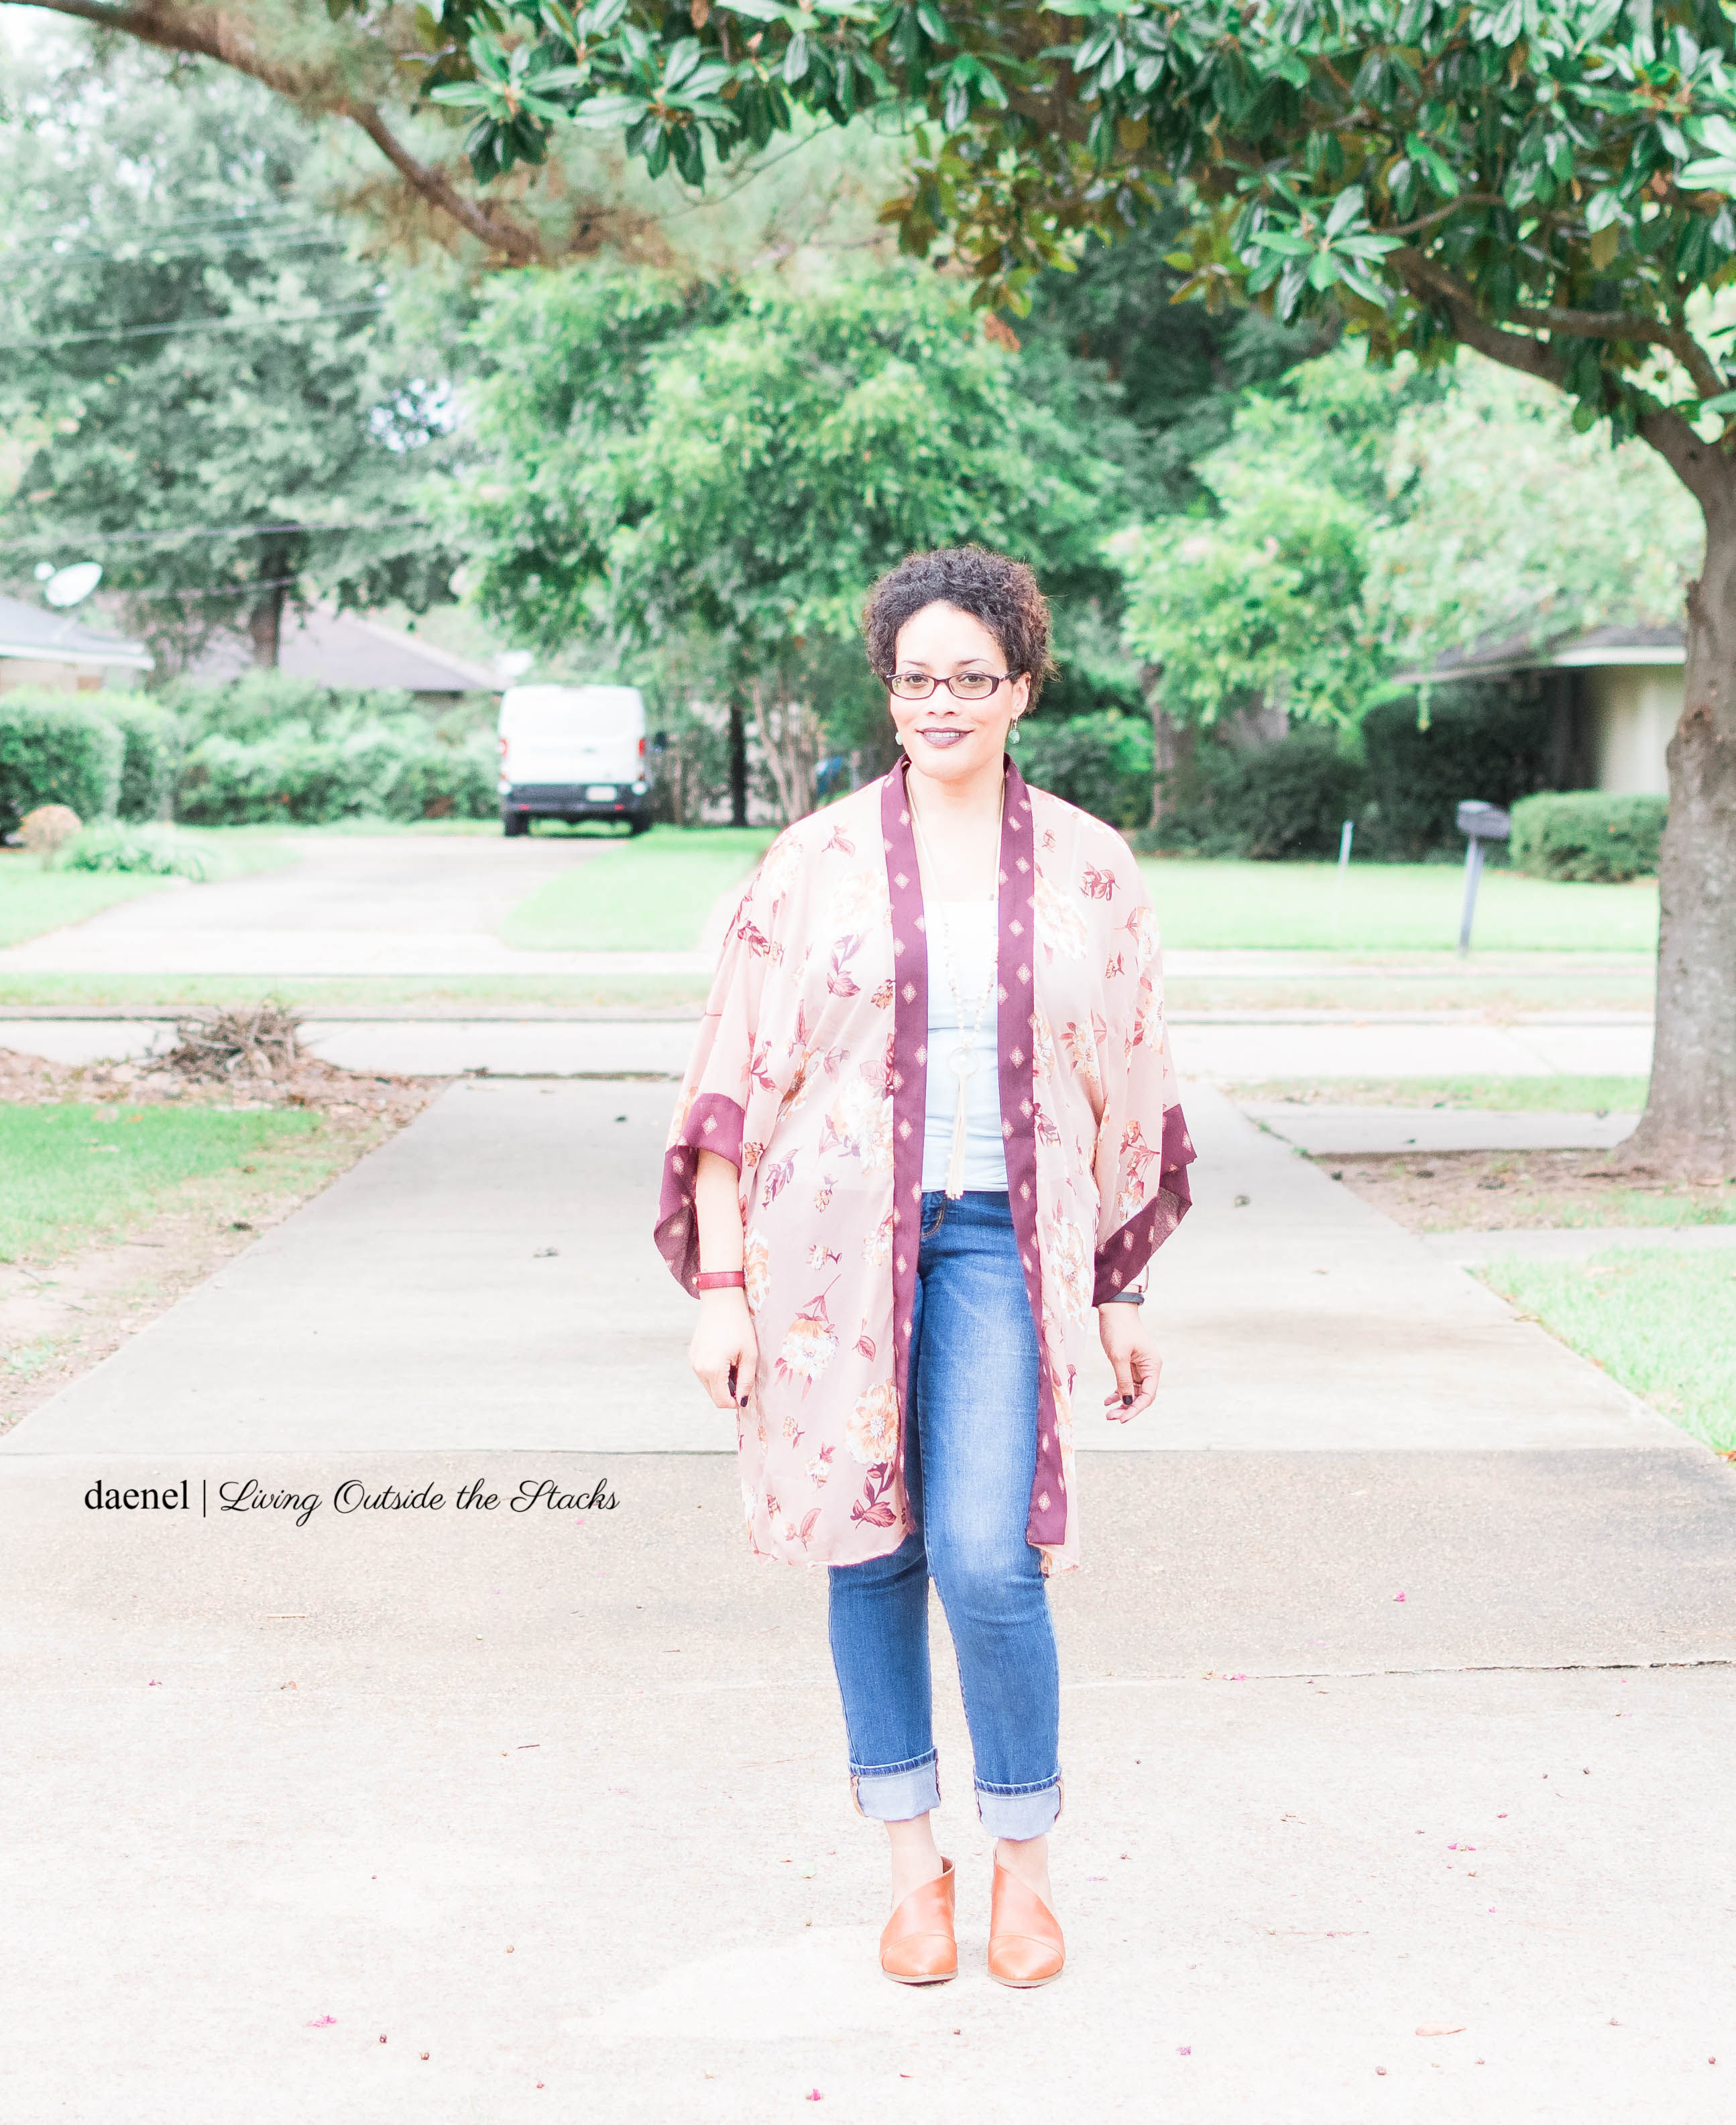 Kimono Turquoise Tank Jeans and Brown Shoes for Style Imitating Art {living outside the stacks}